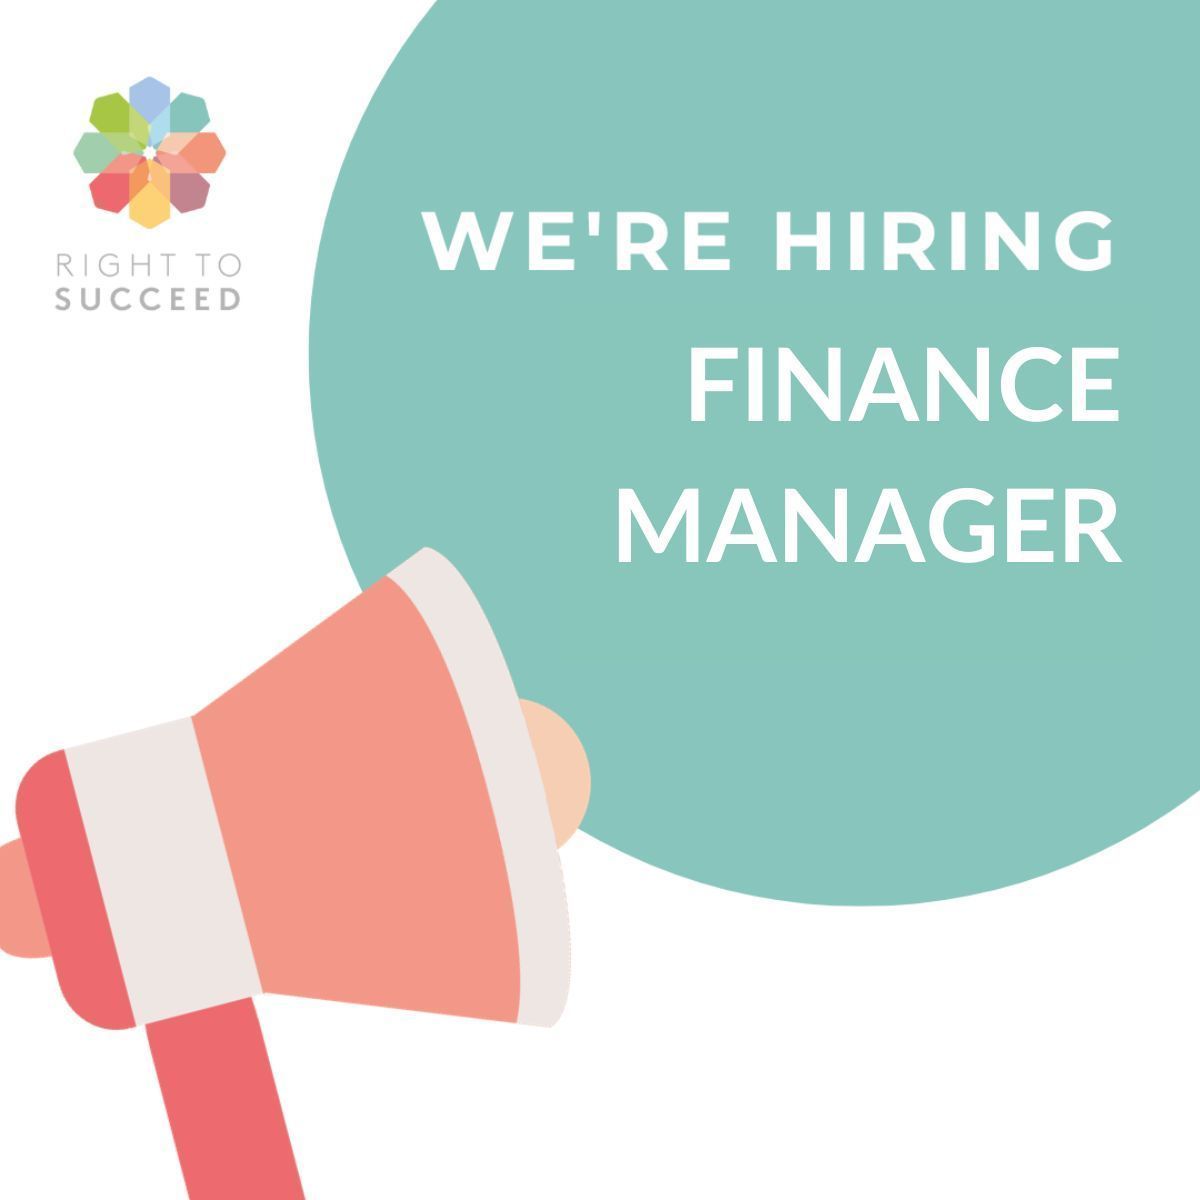 We are looking for a Finance Manager who will be responsible for day-to-day management of the Charity’s financial processes, controls and reporting. The ideal candidate will be highly organised and have strong people skills. #job #hiring #finance Apply: buff.ly/3HUT6rj